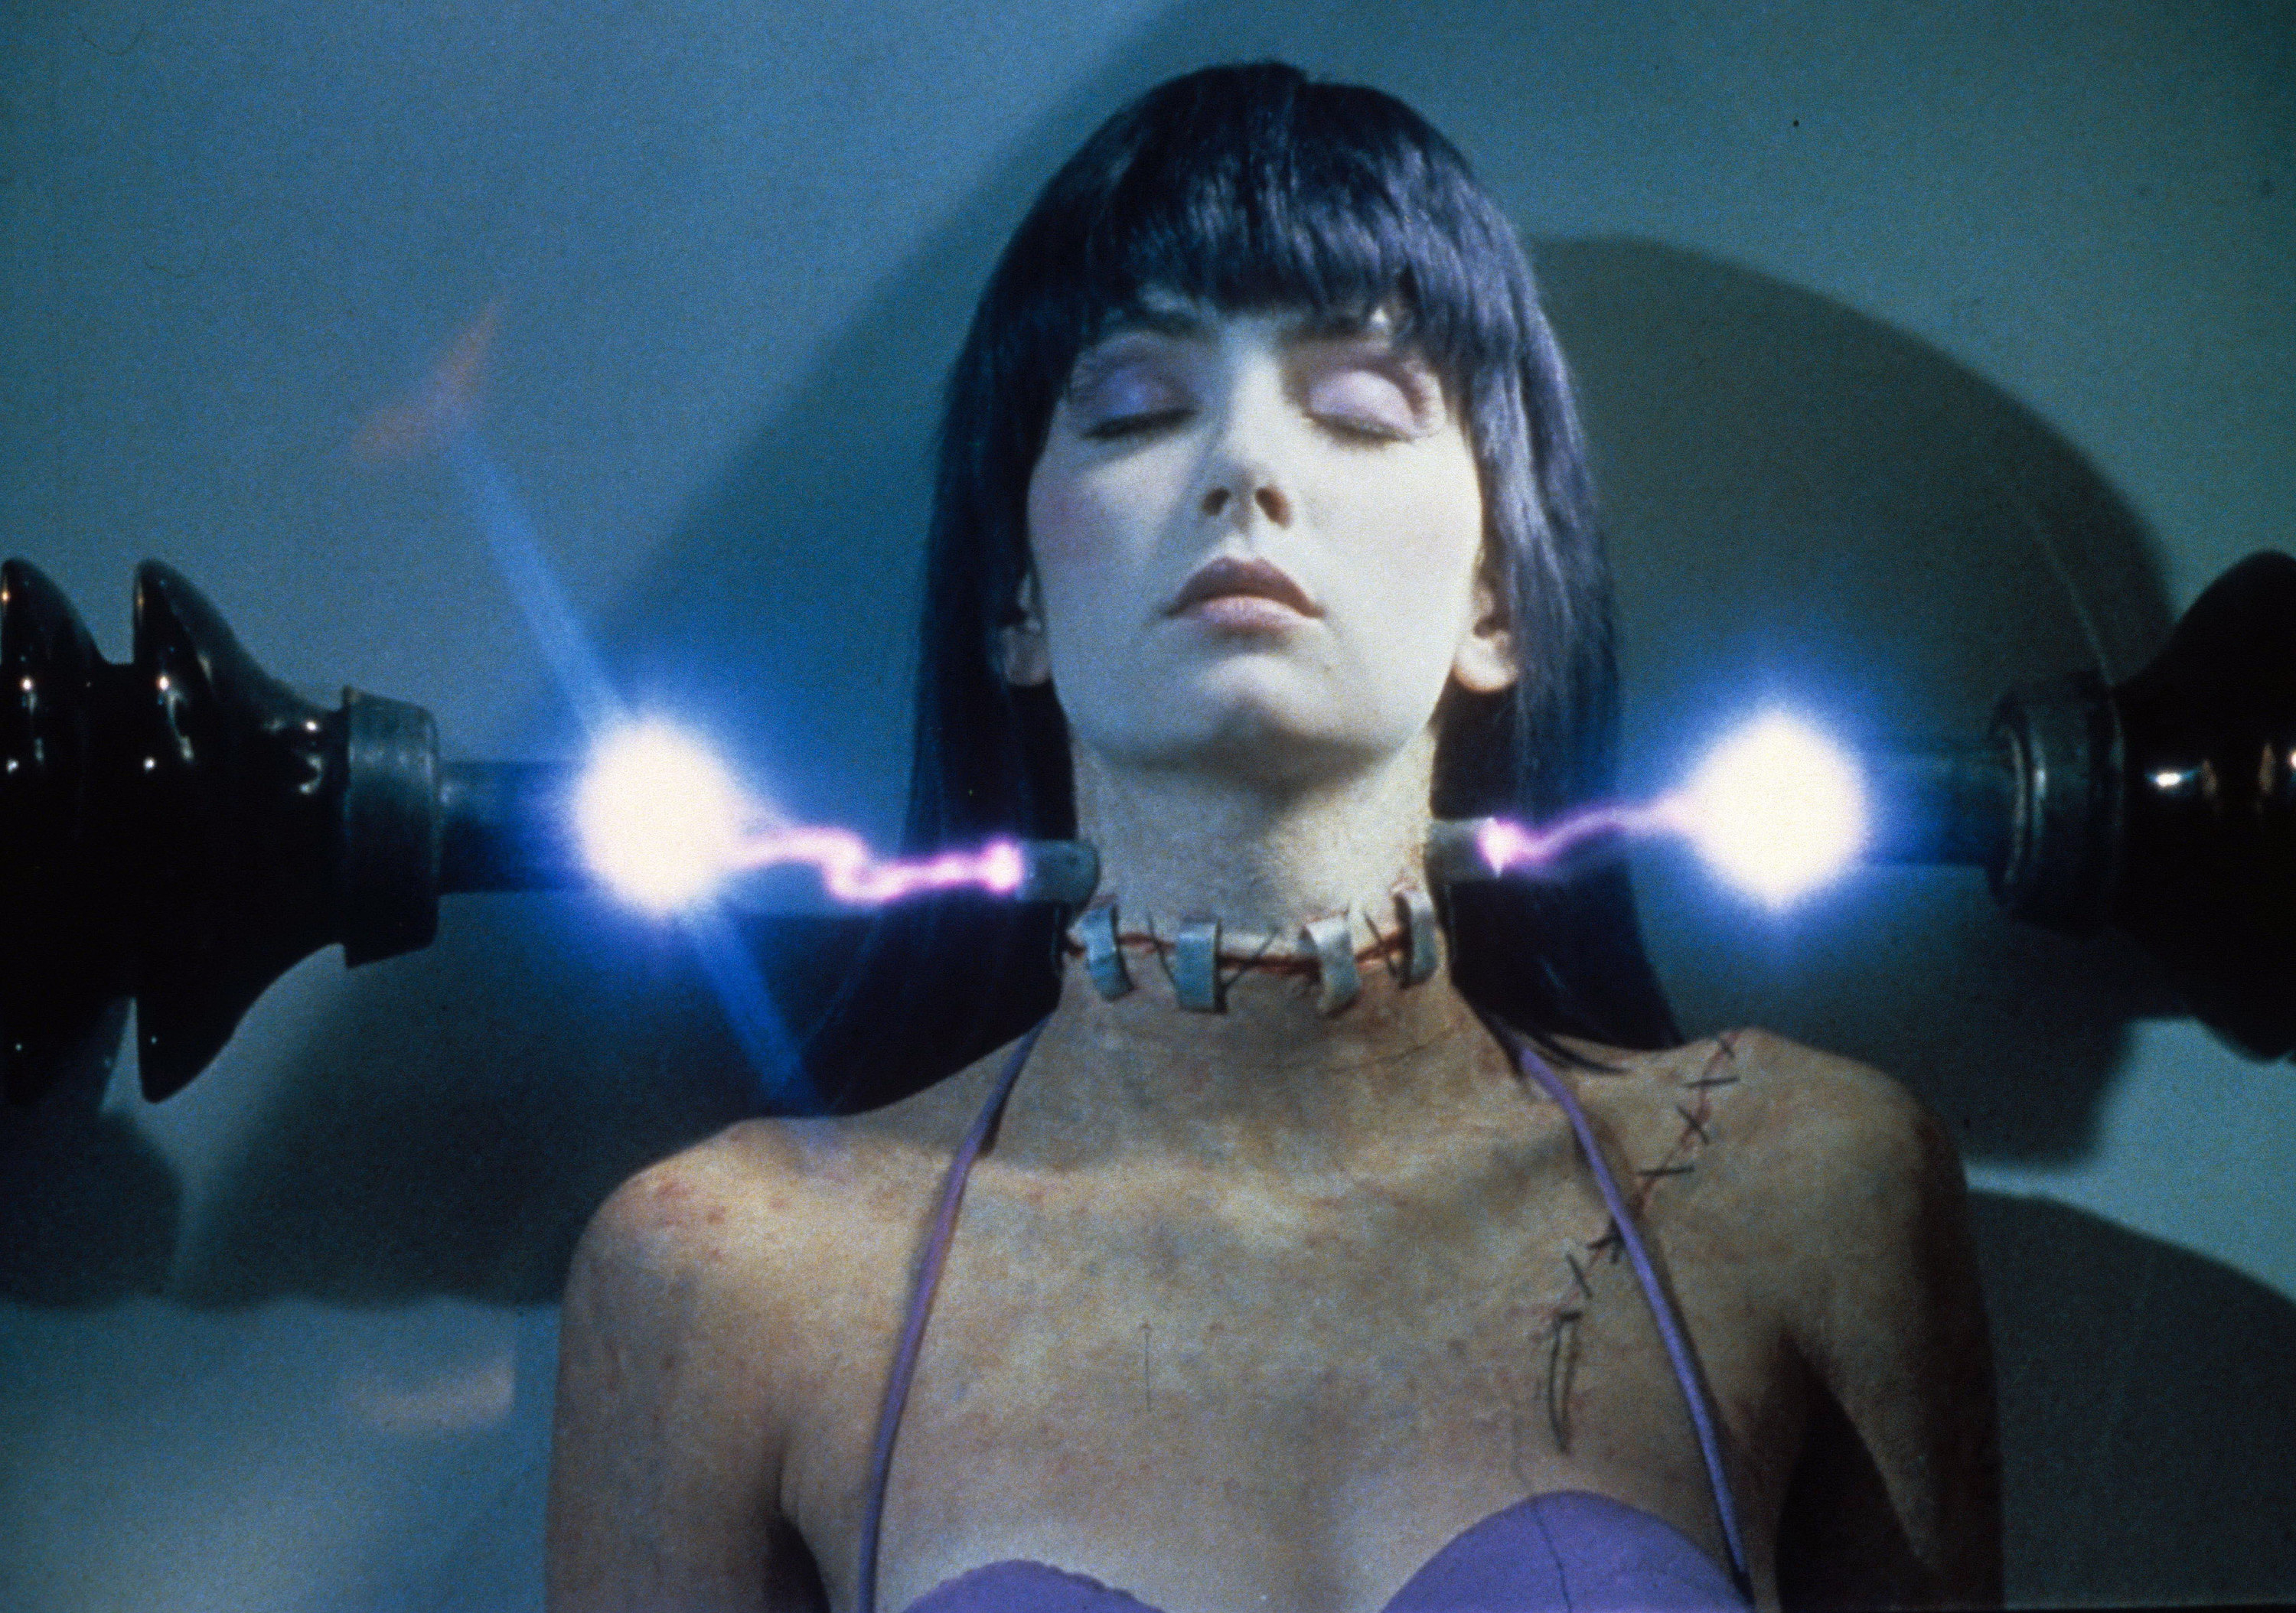 Patty Mullen gets electrified in a patchwork body in &quot;Frankenhooker&quot;